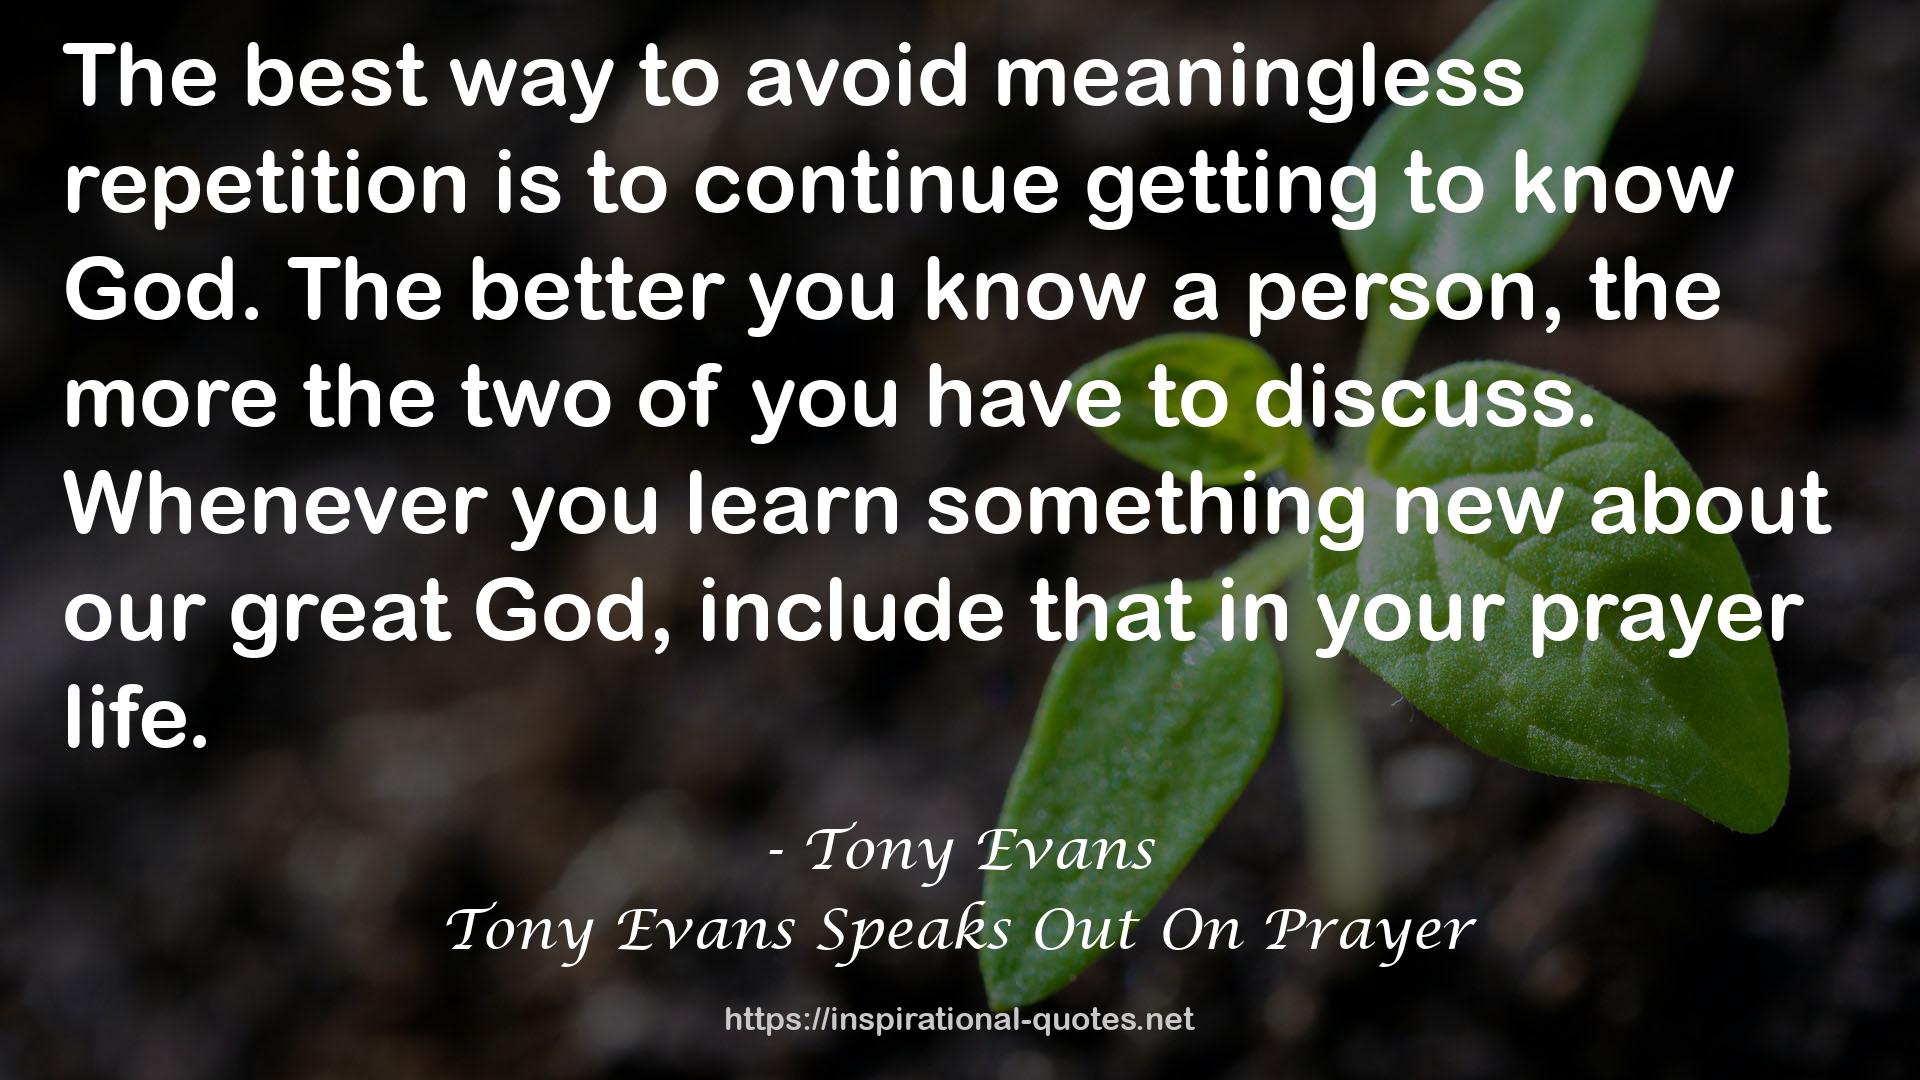 Tony Evans Speaks Out On Prayer QUOTES